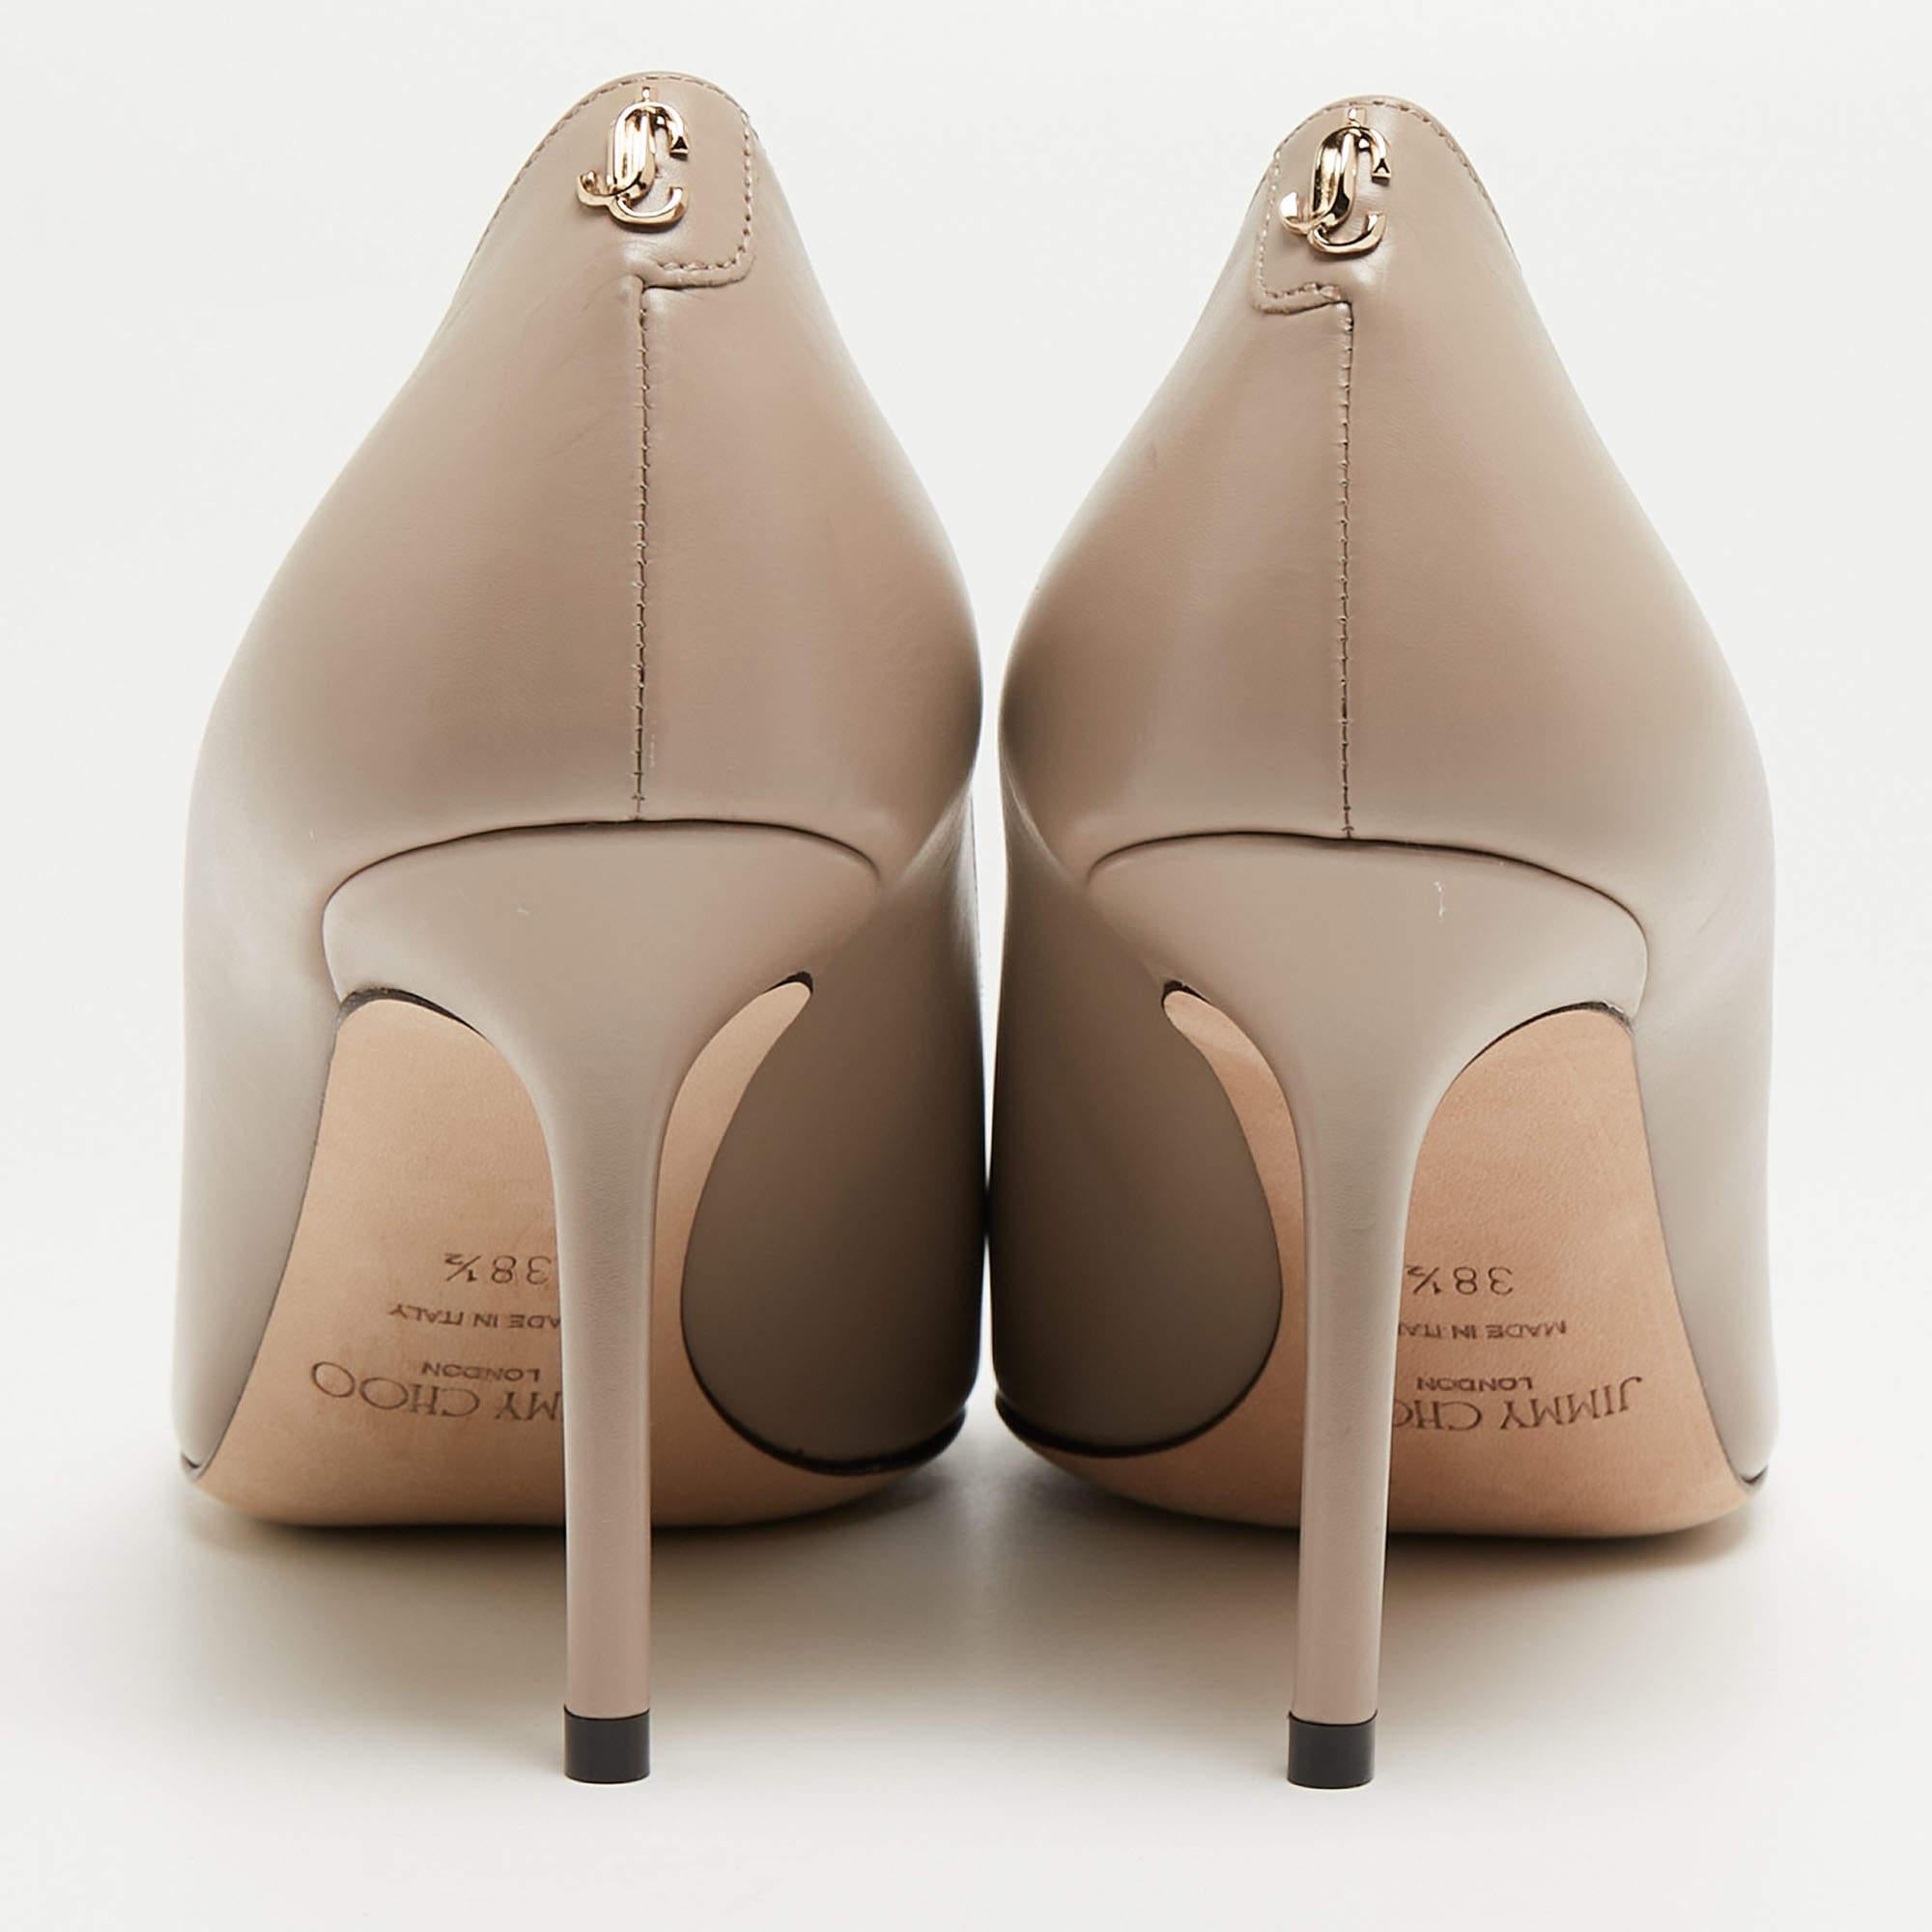 Exuding femininity and elegance, these pumps feature a chic silhouette with an attractive design. You can wear these pumps for a stylish look.

Includes: Original Box